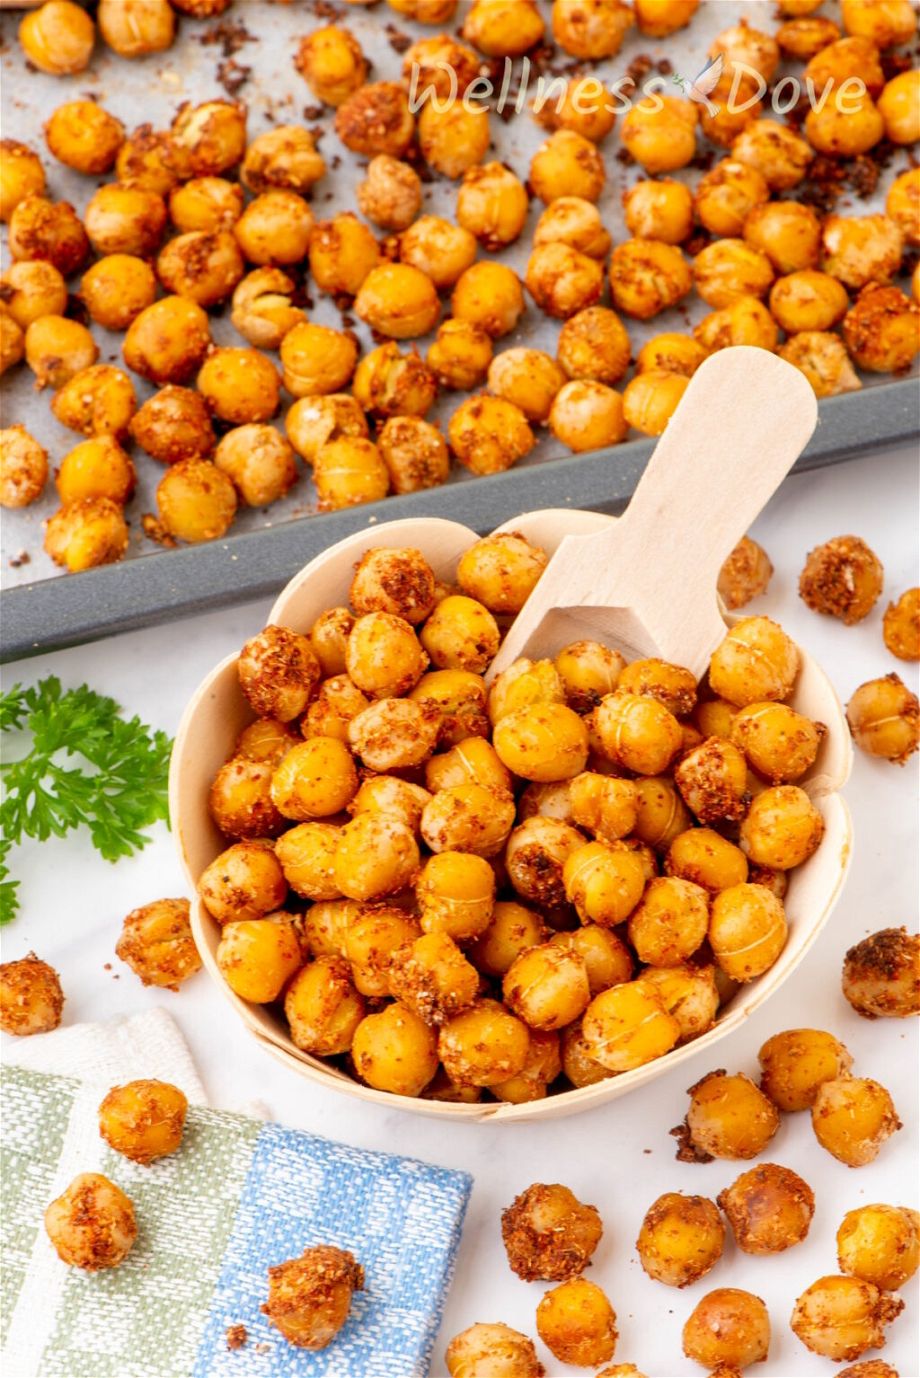 the Oil-free Oven Roasted Chickpeas in a small wooden cup